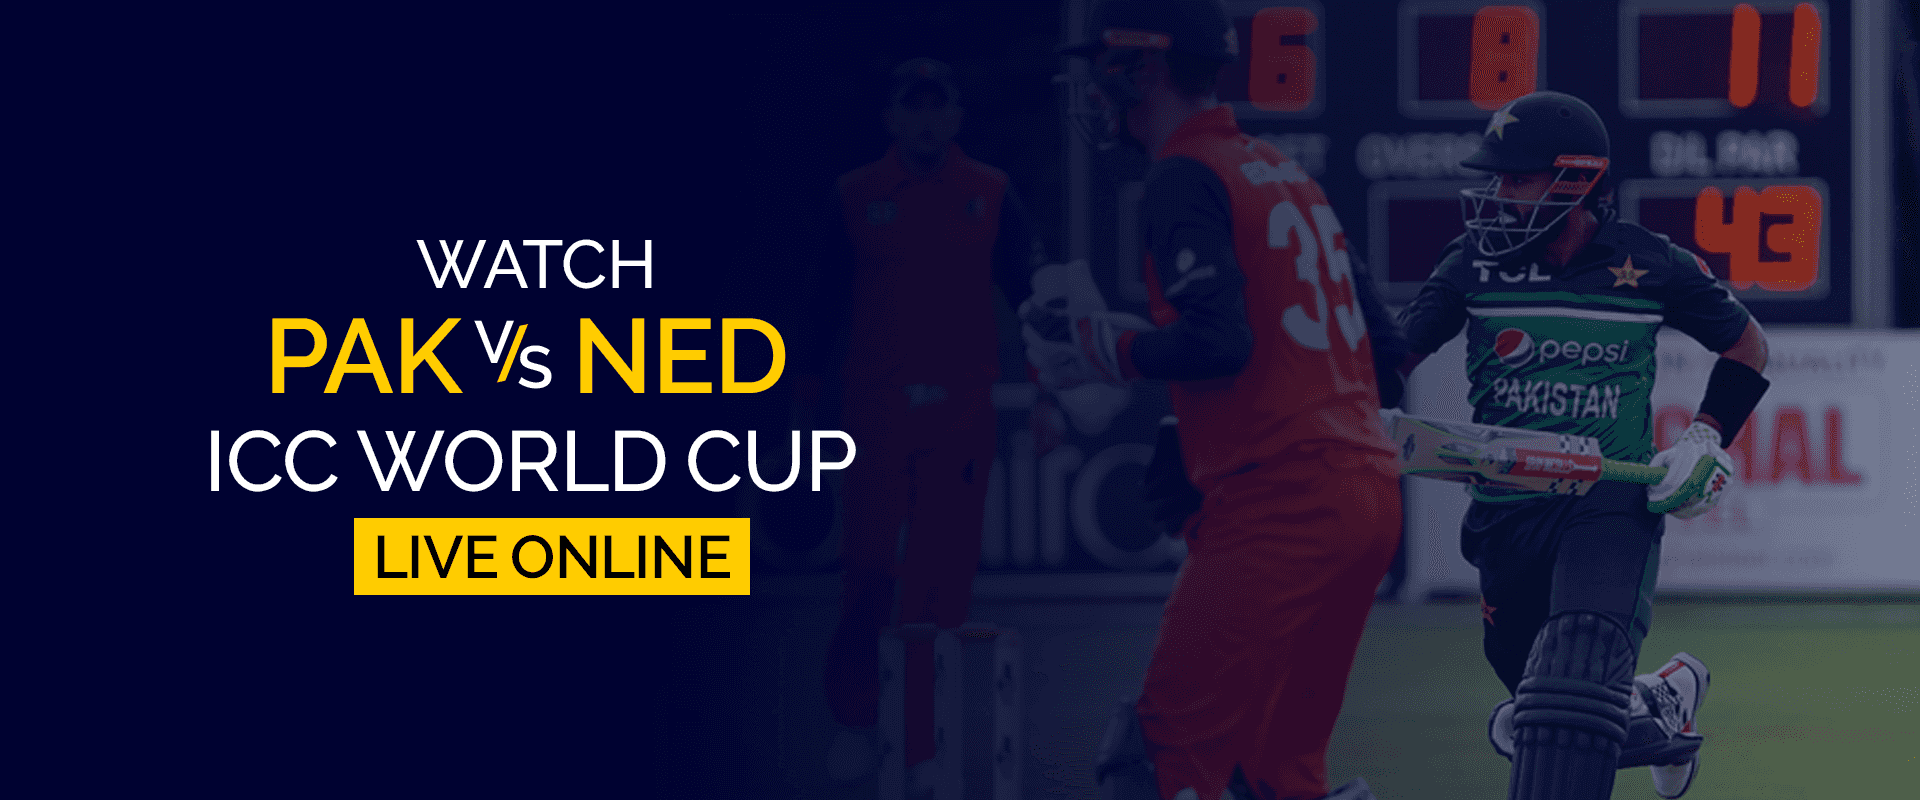 Watch PAK vs NED ICC World Cup Live Online